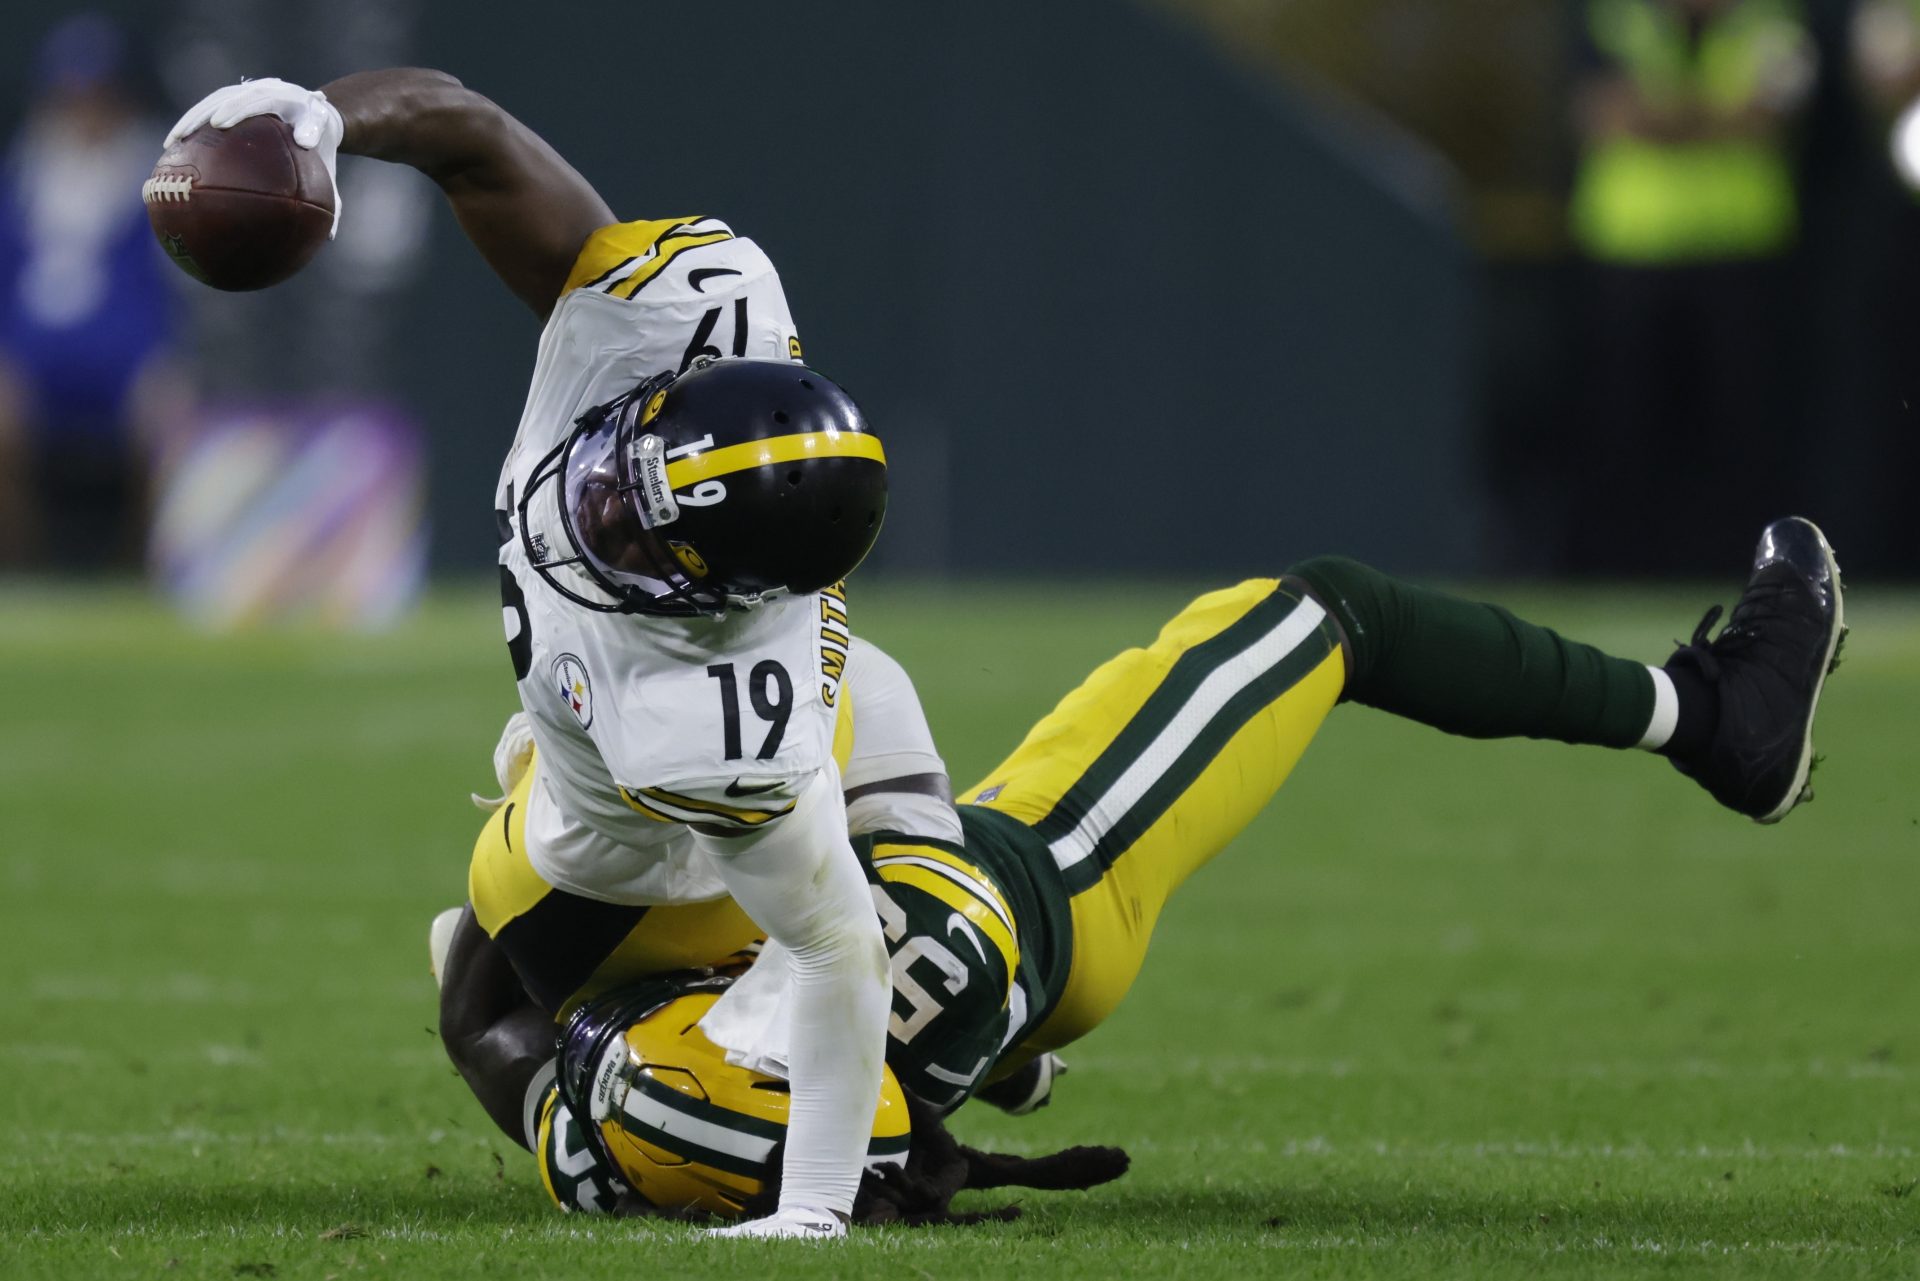 Green Bay Packers' De'Vondre Campbell stops Pittsburgh Steelers' JuJu Smith-Schuster from getting a first down during the second half of an NFL football game Sunday, Oct. 3, 2021, in Green Bay, Wis.